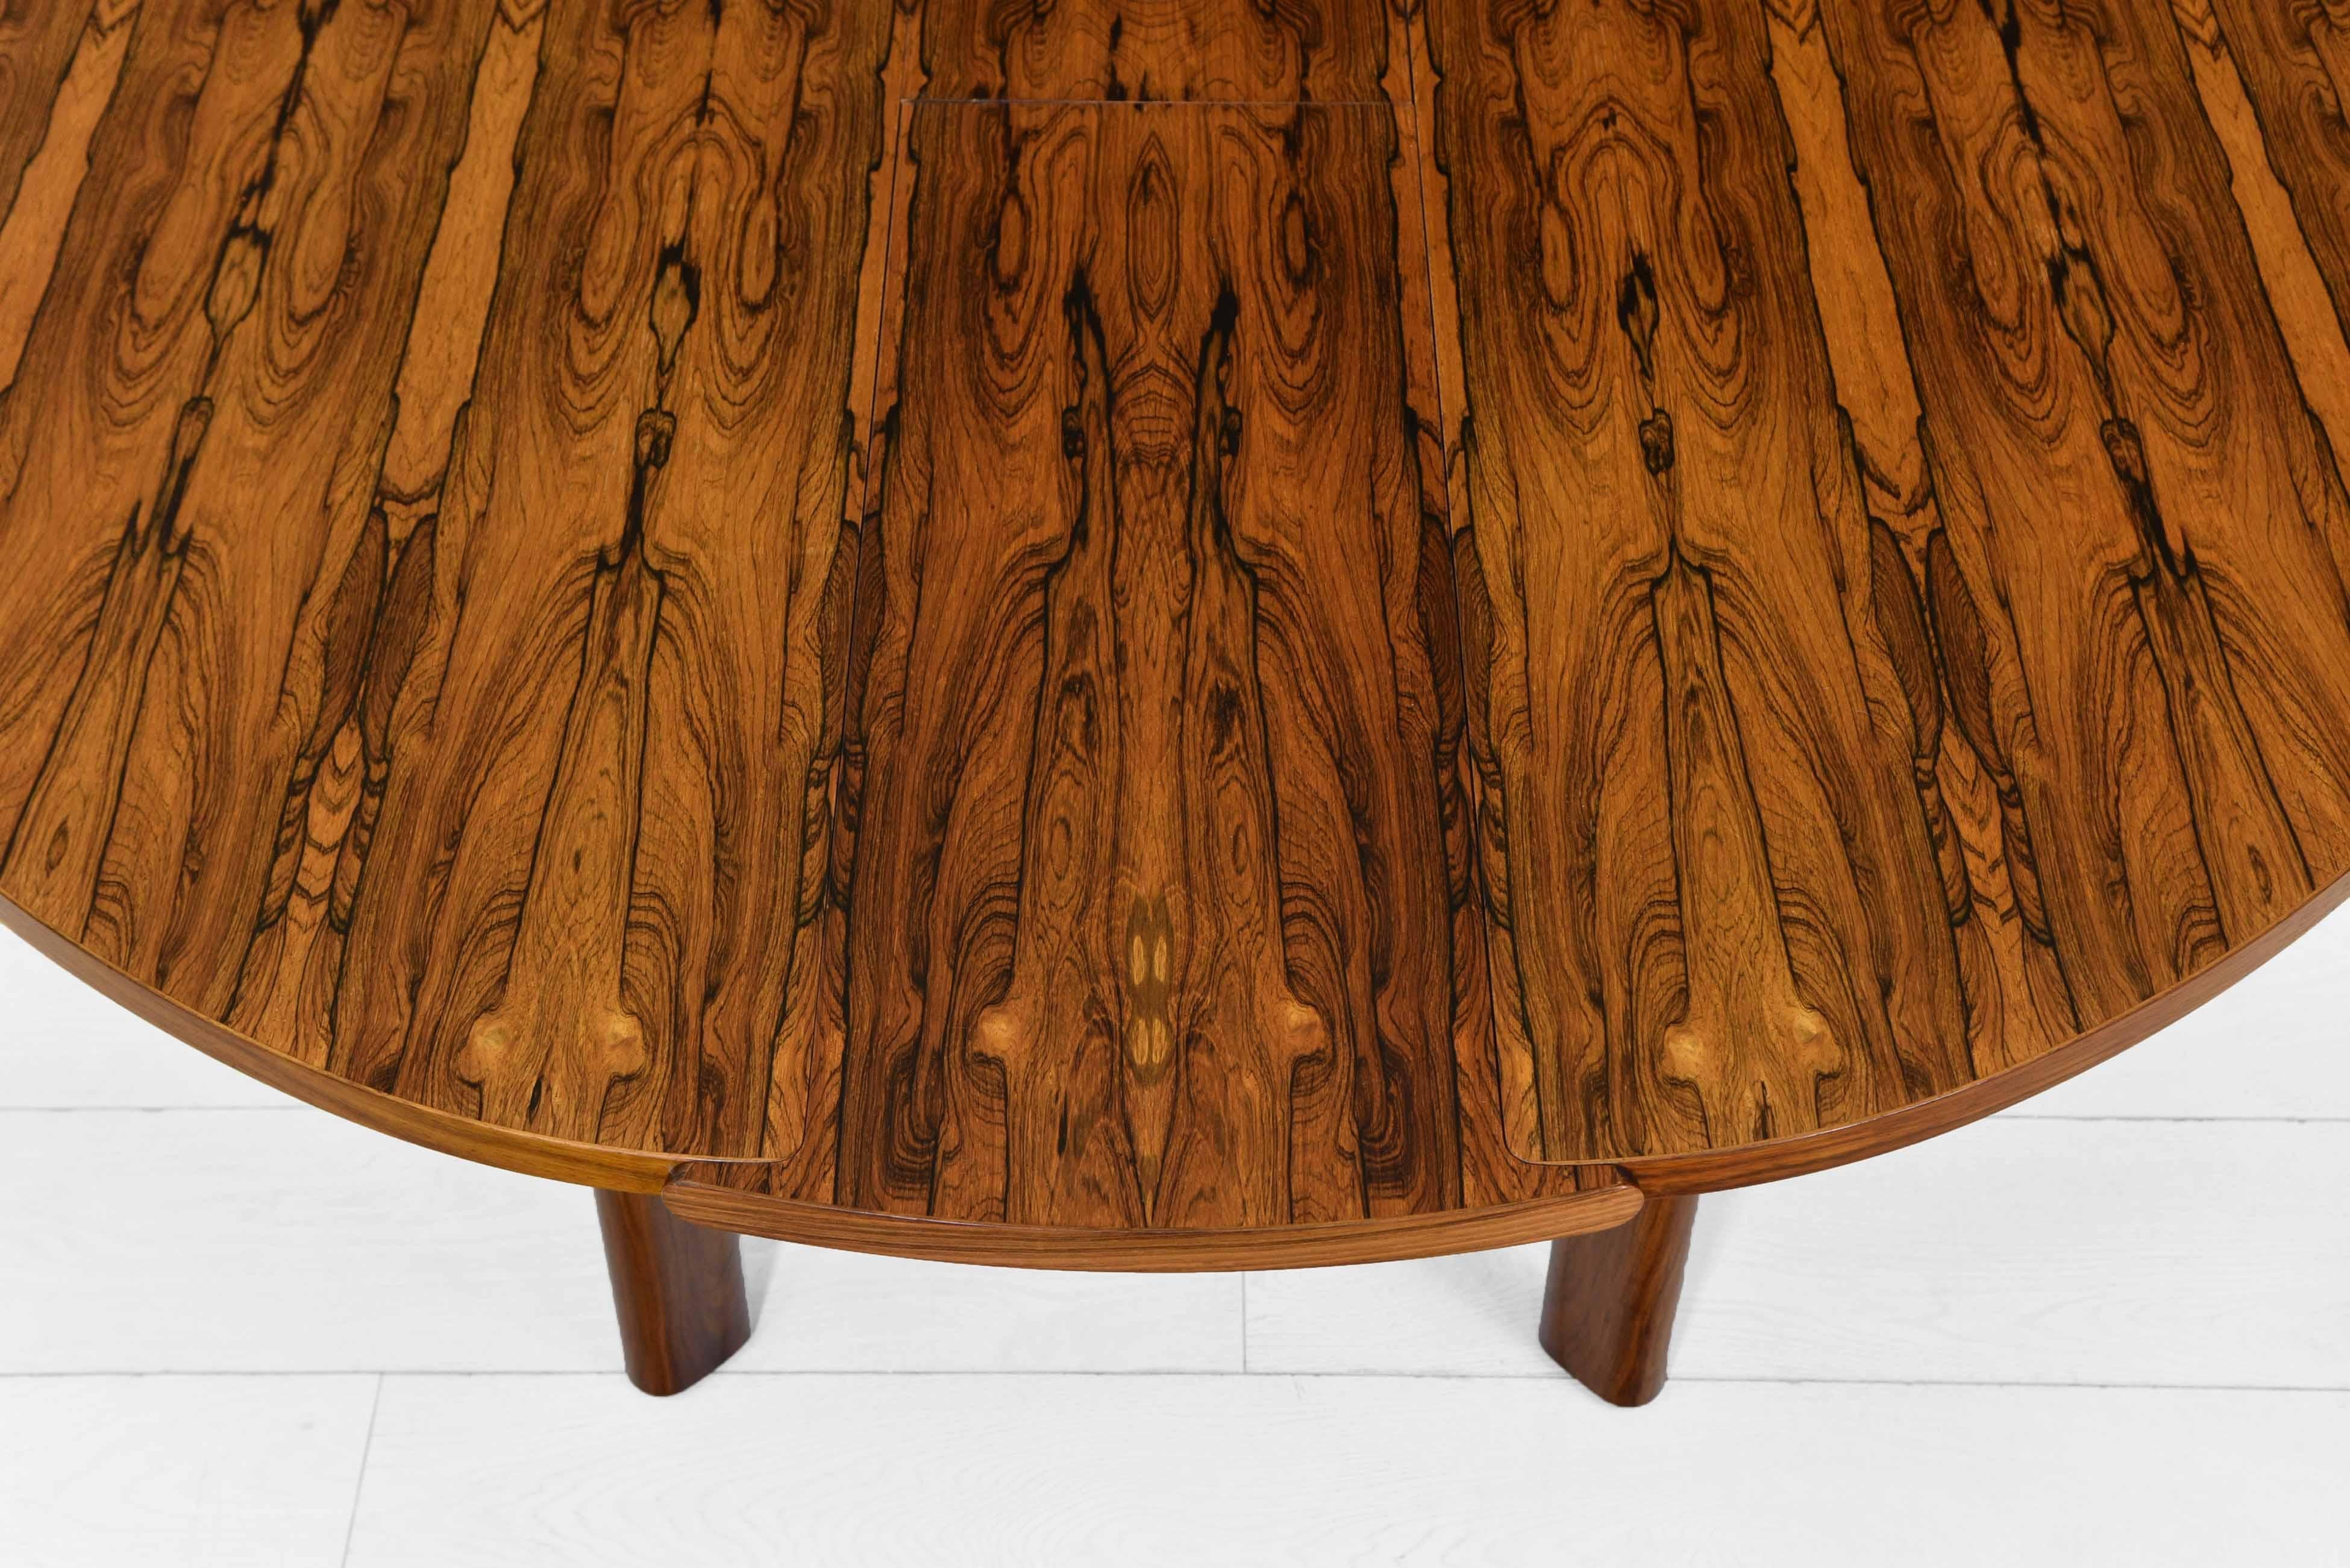 A superb mid century Brazilian rosewood oval dining table. Extends neatly to a circular shape using a very clever method, as shown in the video. English - Circa 1960s.

The table is in very good condition, showing some light signs of use. The